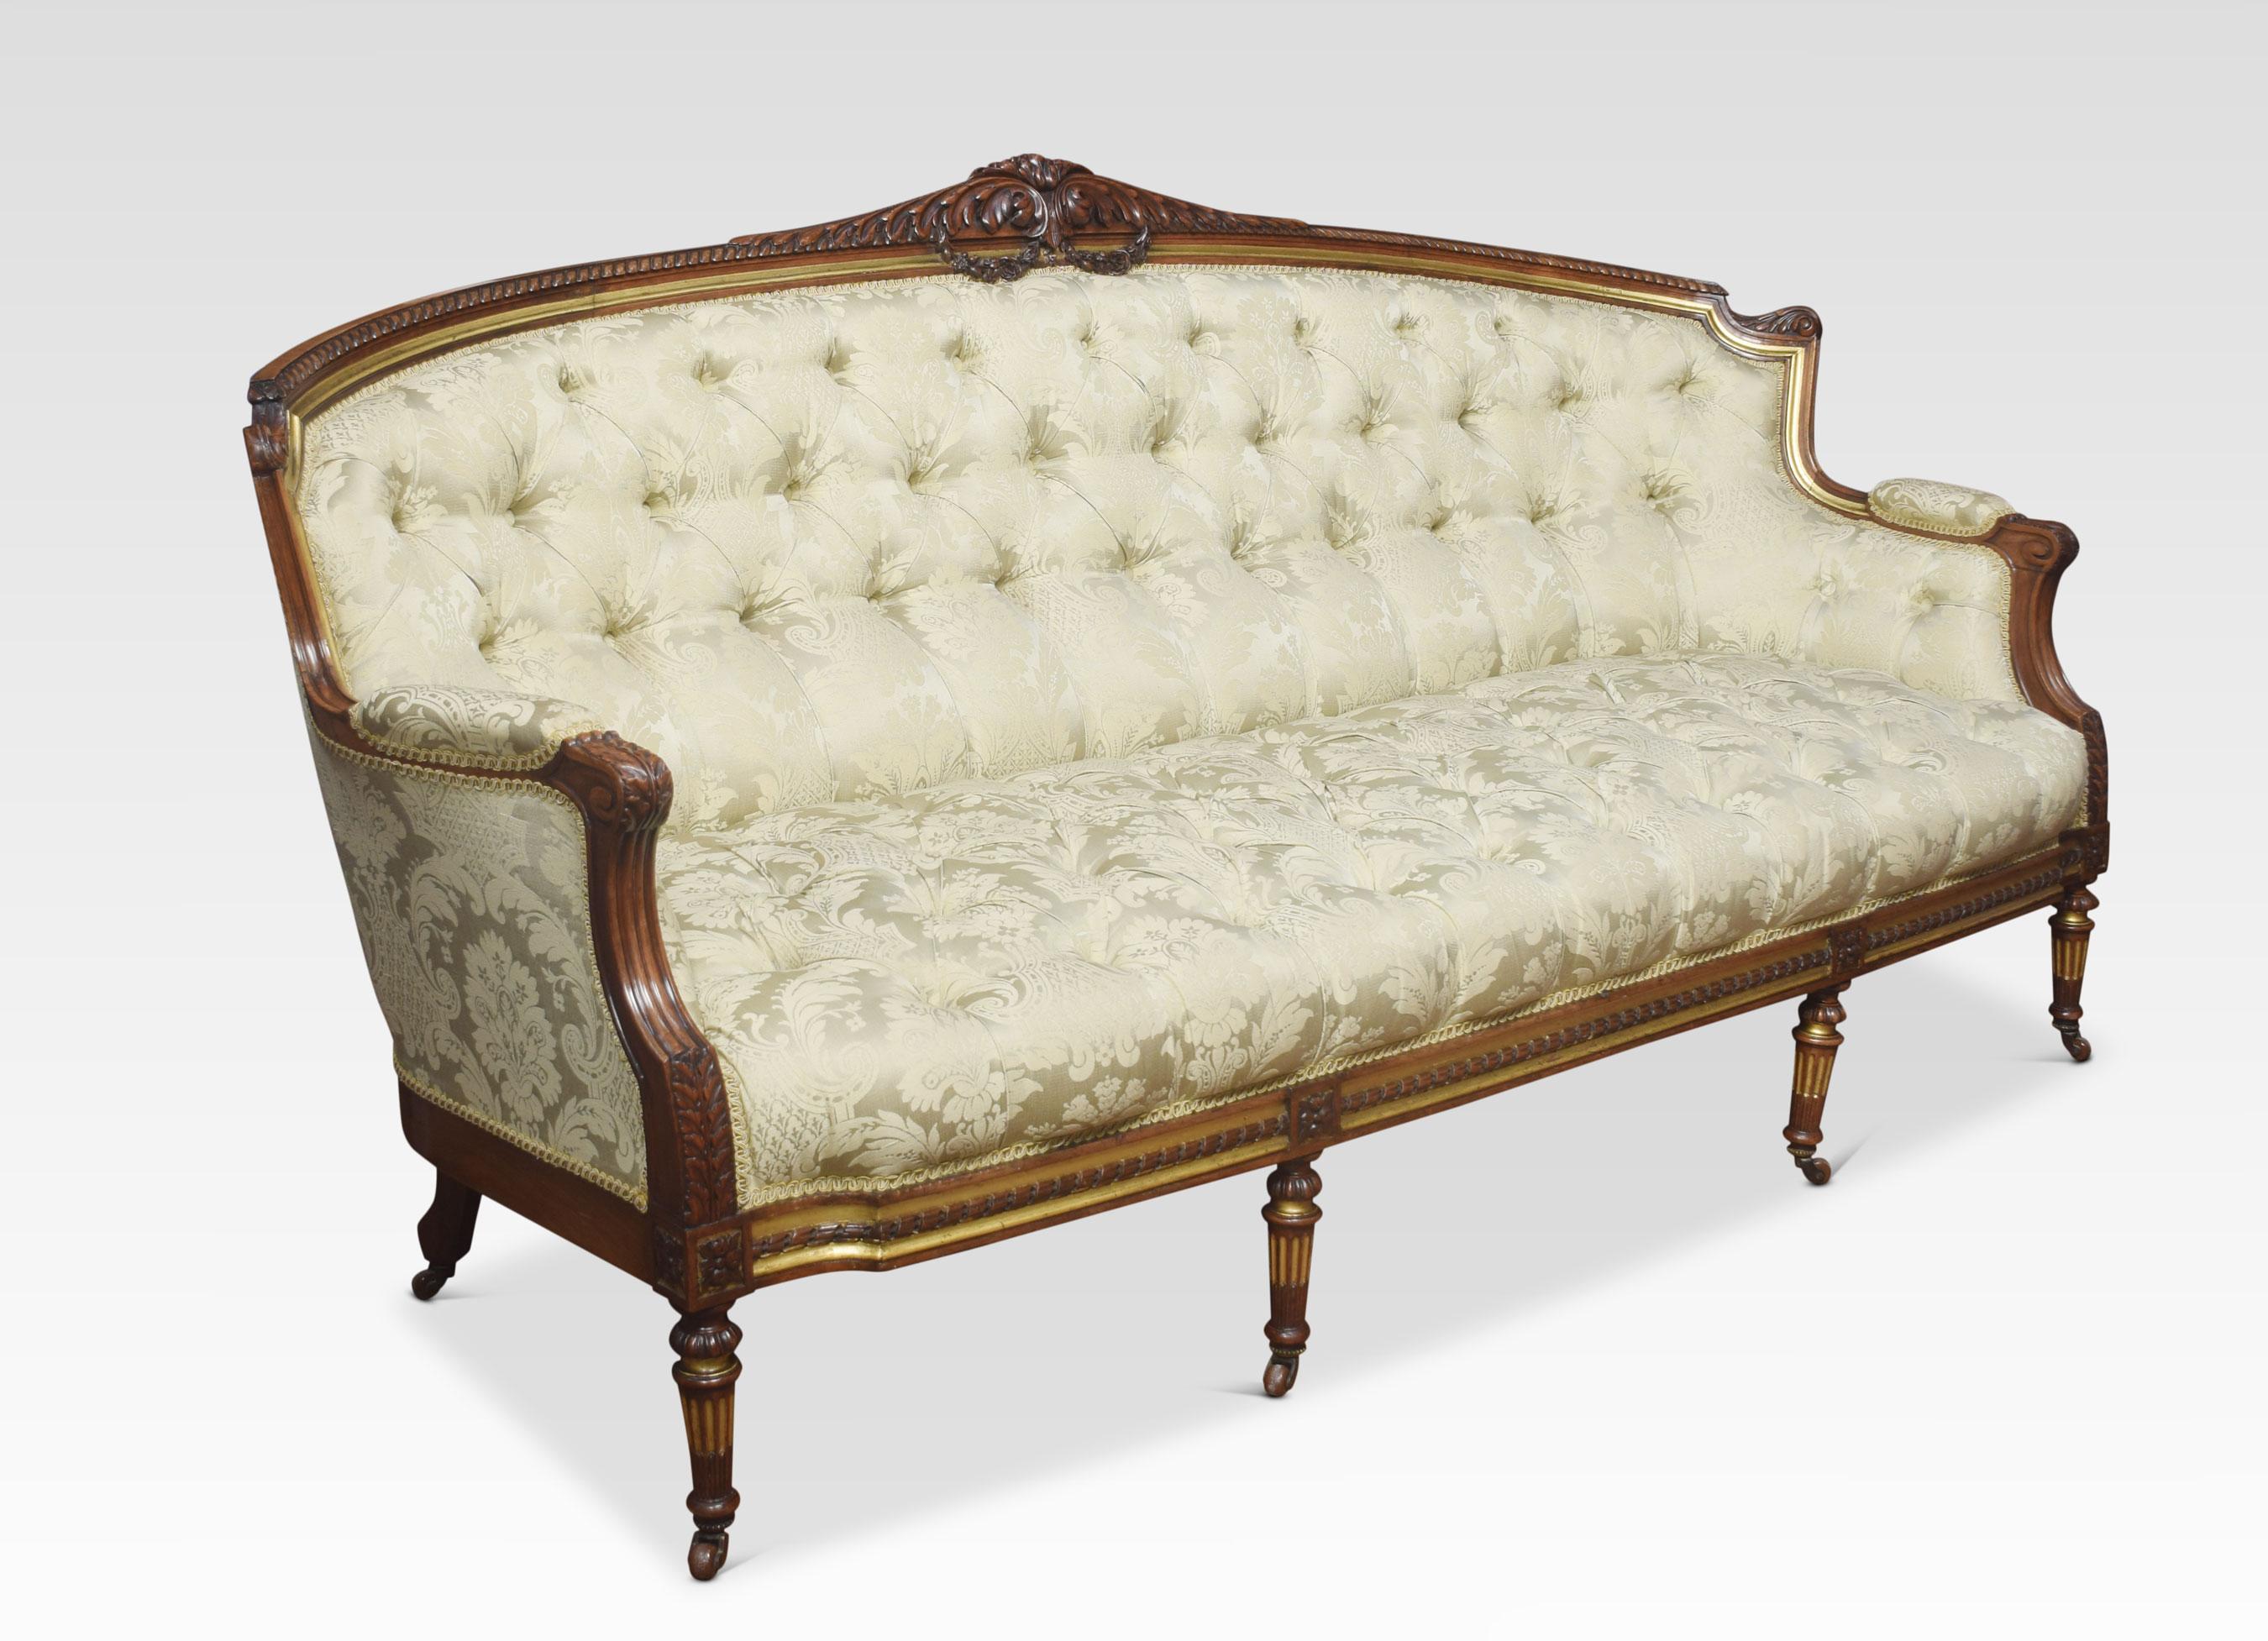 A large walnut framed settee, the finely carved parcel-gilt frame above upholstered back, seat and arms in deep buttoned damask fabric. All raised up on fluted reeded front legs terminating in ceramic castors.
Dimensions
Height 40 inches height to